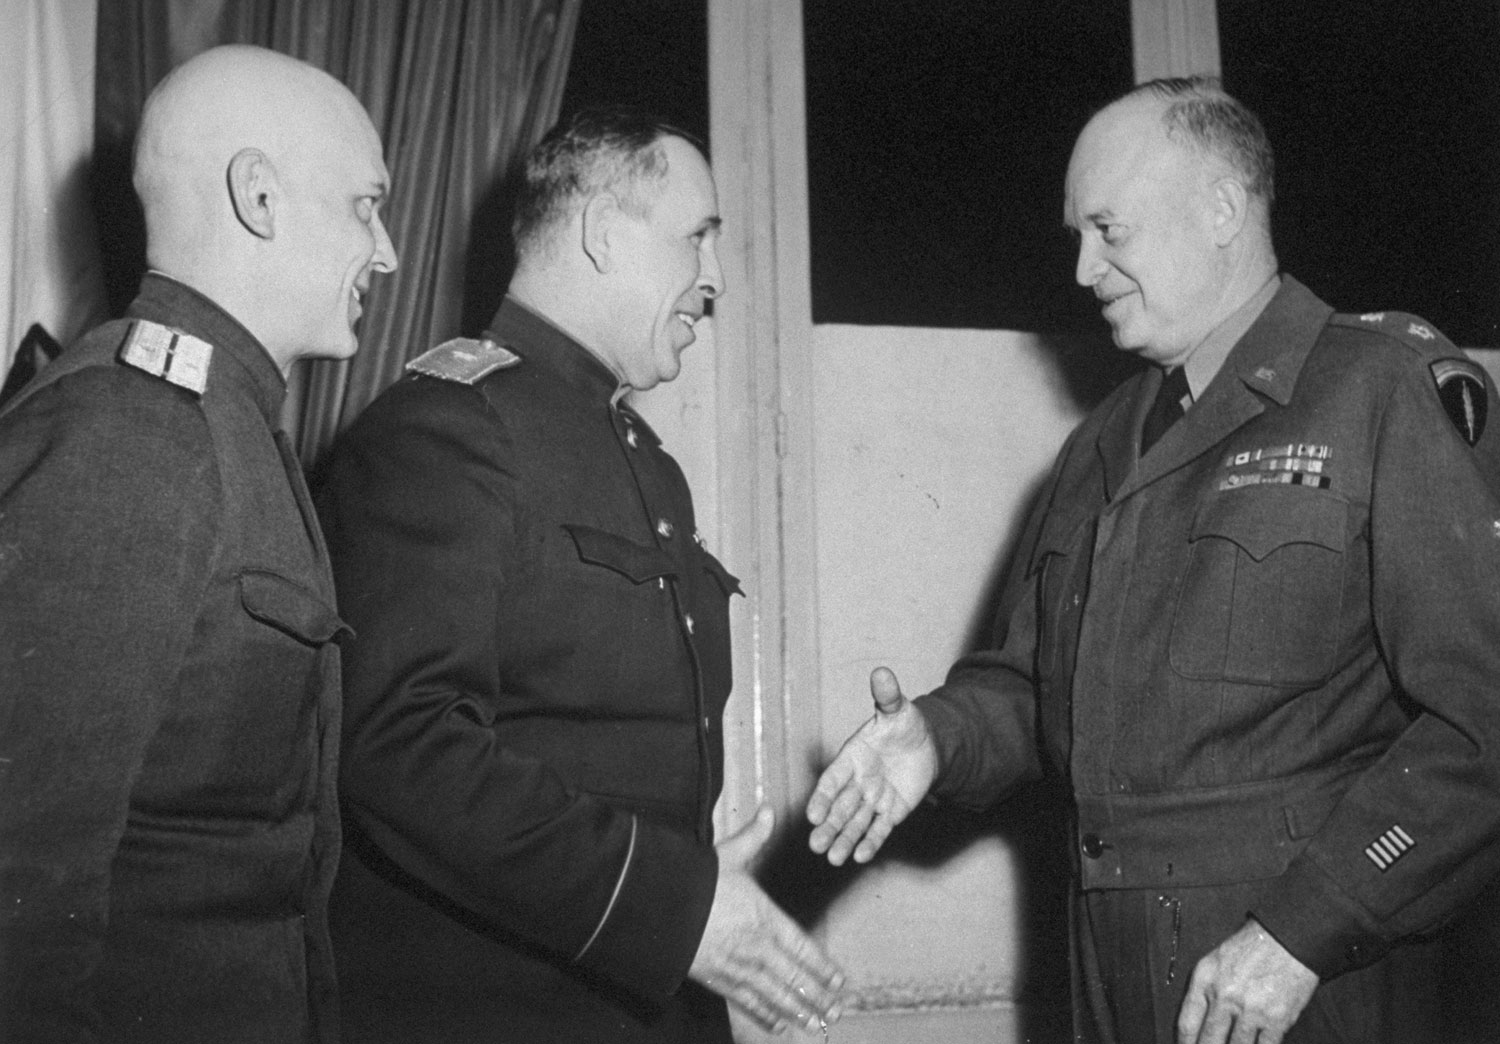 After surrender, Eisenhower (right) seizes hand of General Susloparov and says, 'This is a great moment for us all.' But surrender announcement was held up for Moscow approval.